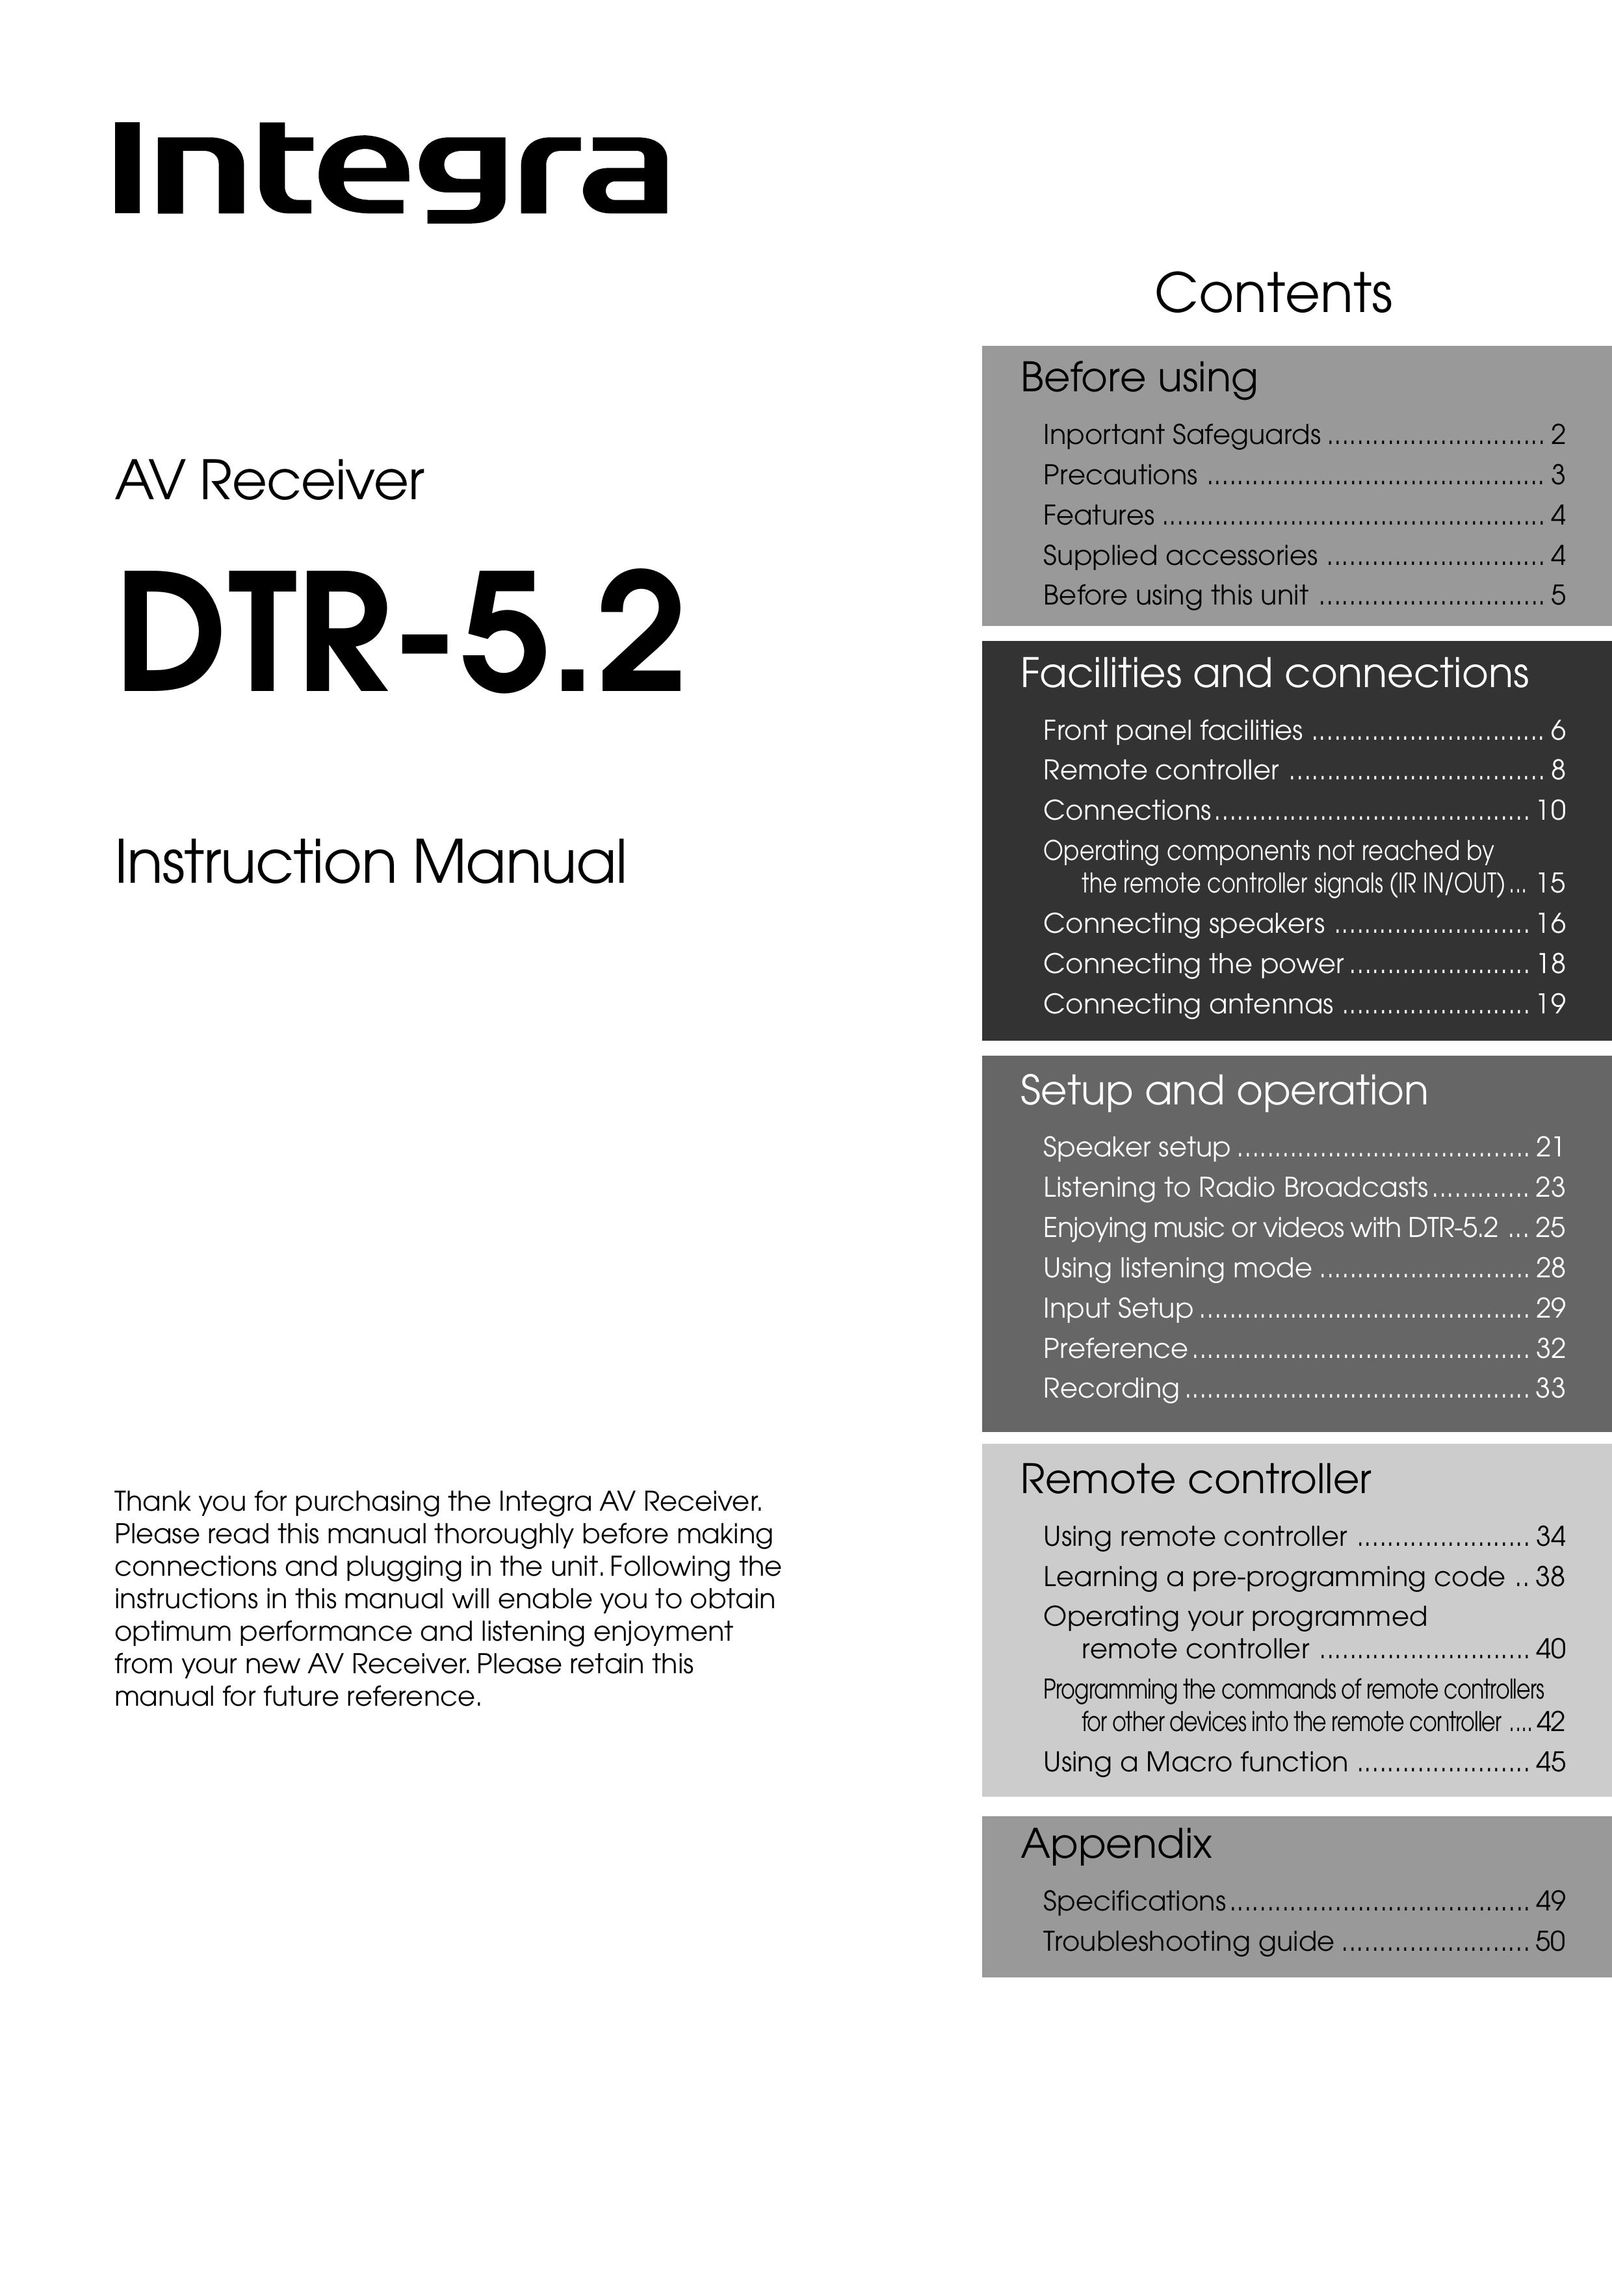 Integra DTR-5.2 Stereo Receiver User Manual (Page 1)